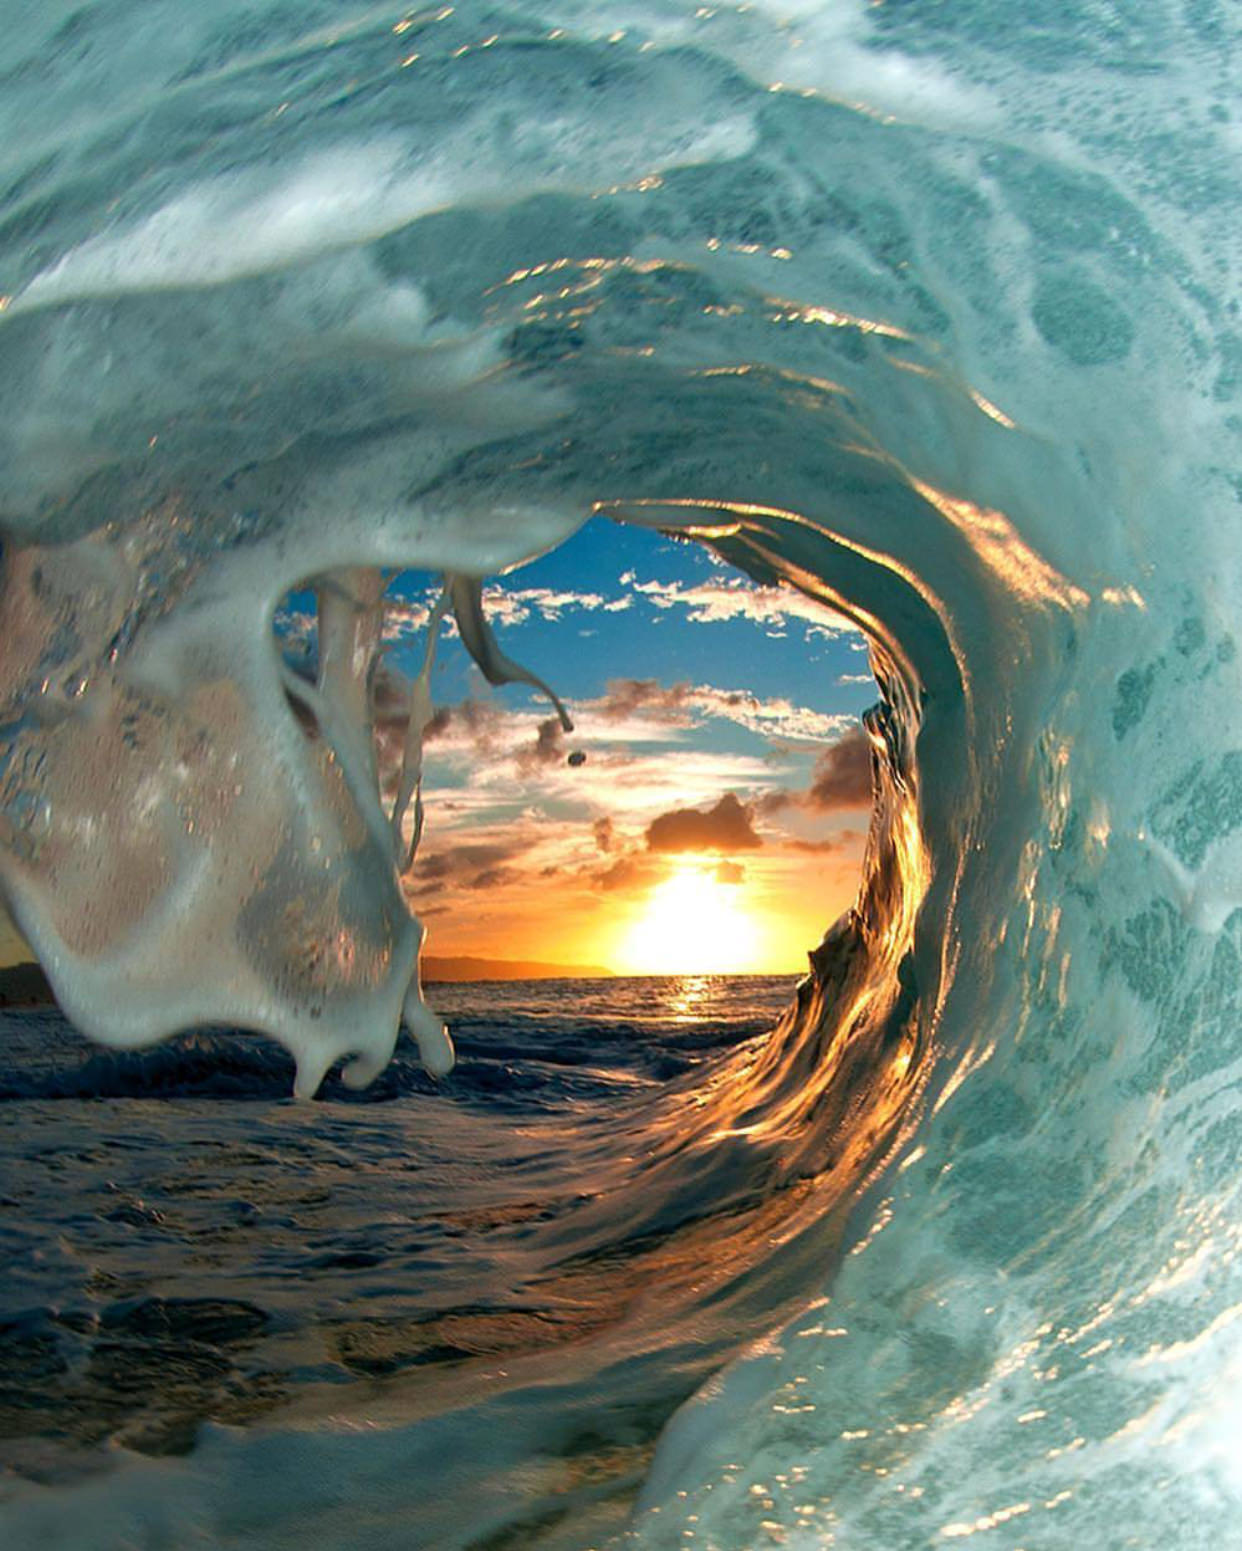 A view of the sunrise from inside a wave is 